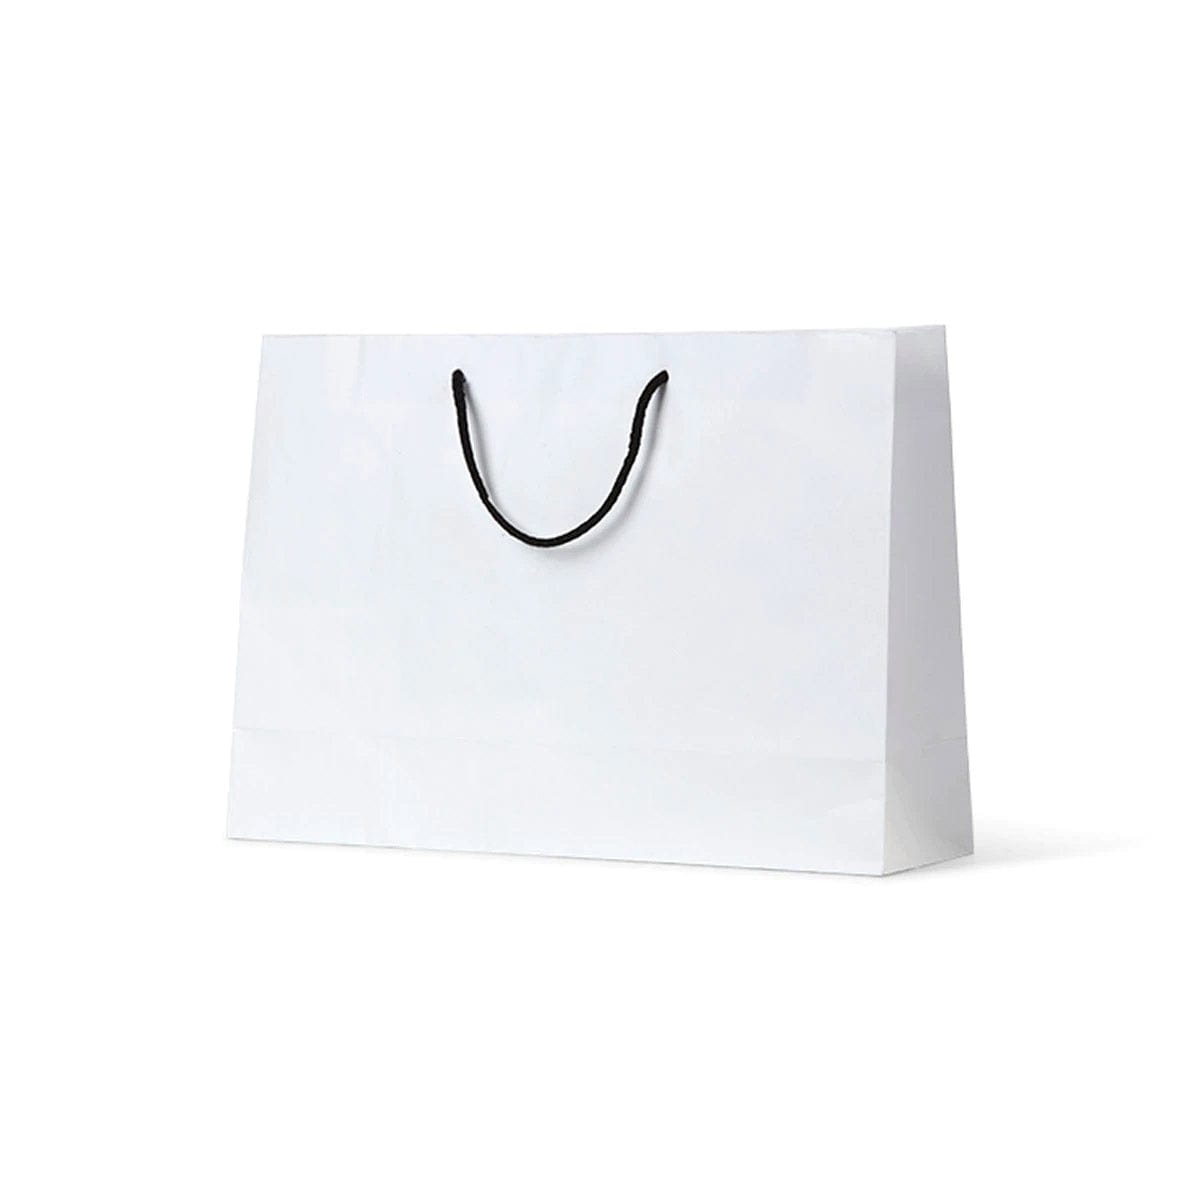 NEON - Deluxe White Kraft Paper Bag - Small Boutique with black handle